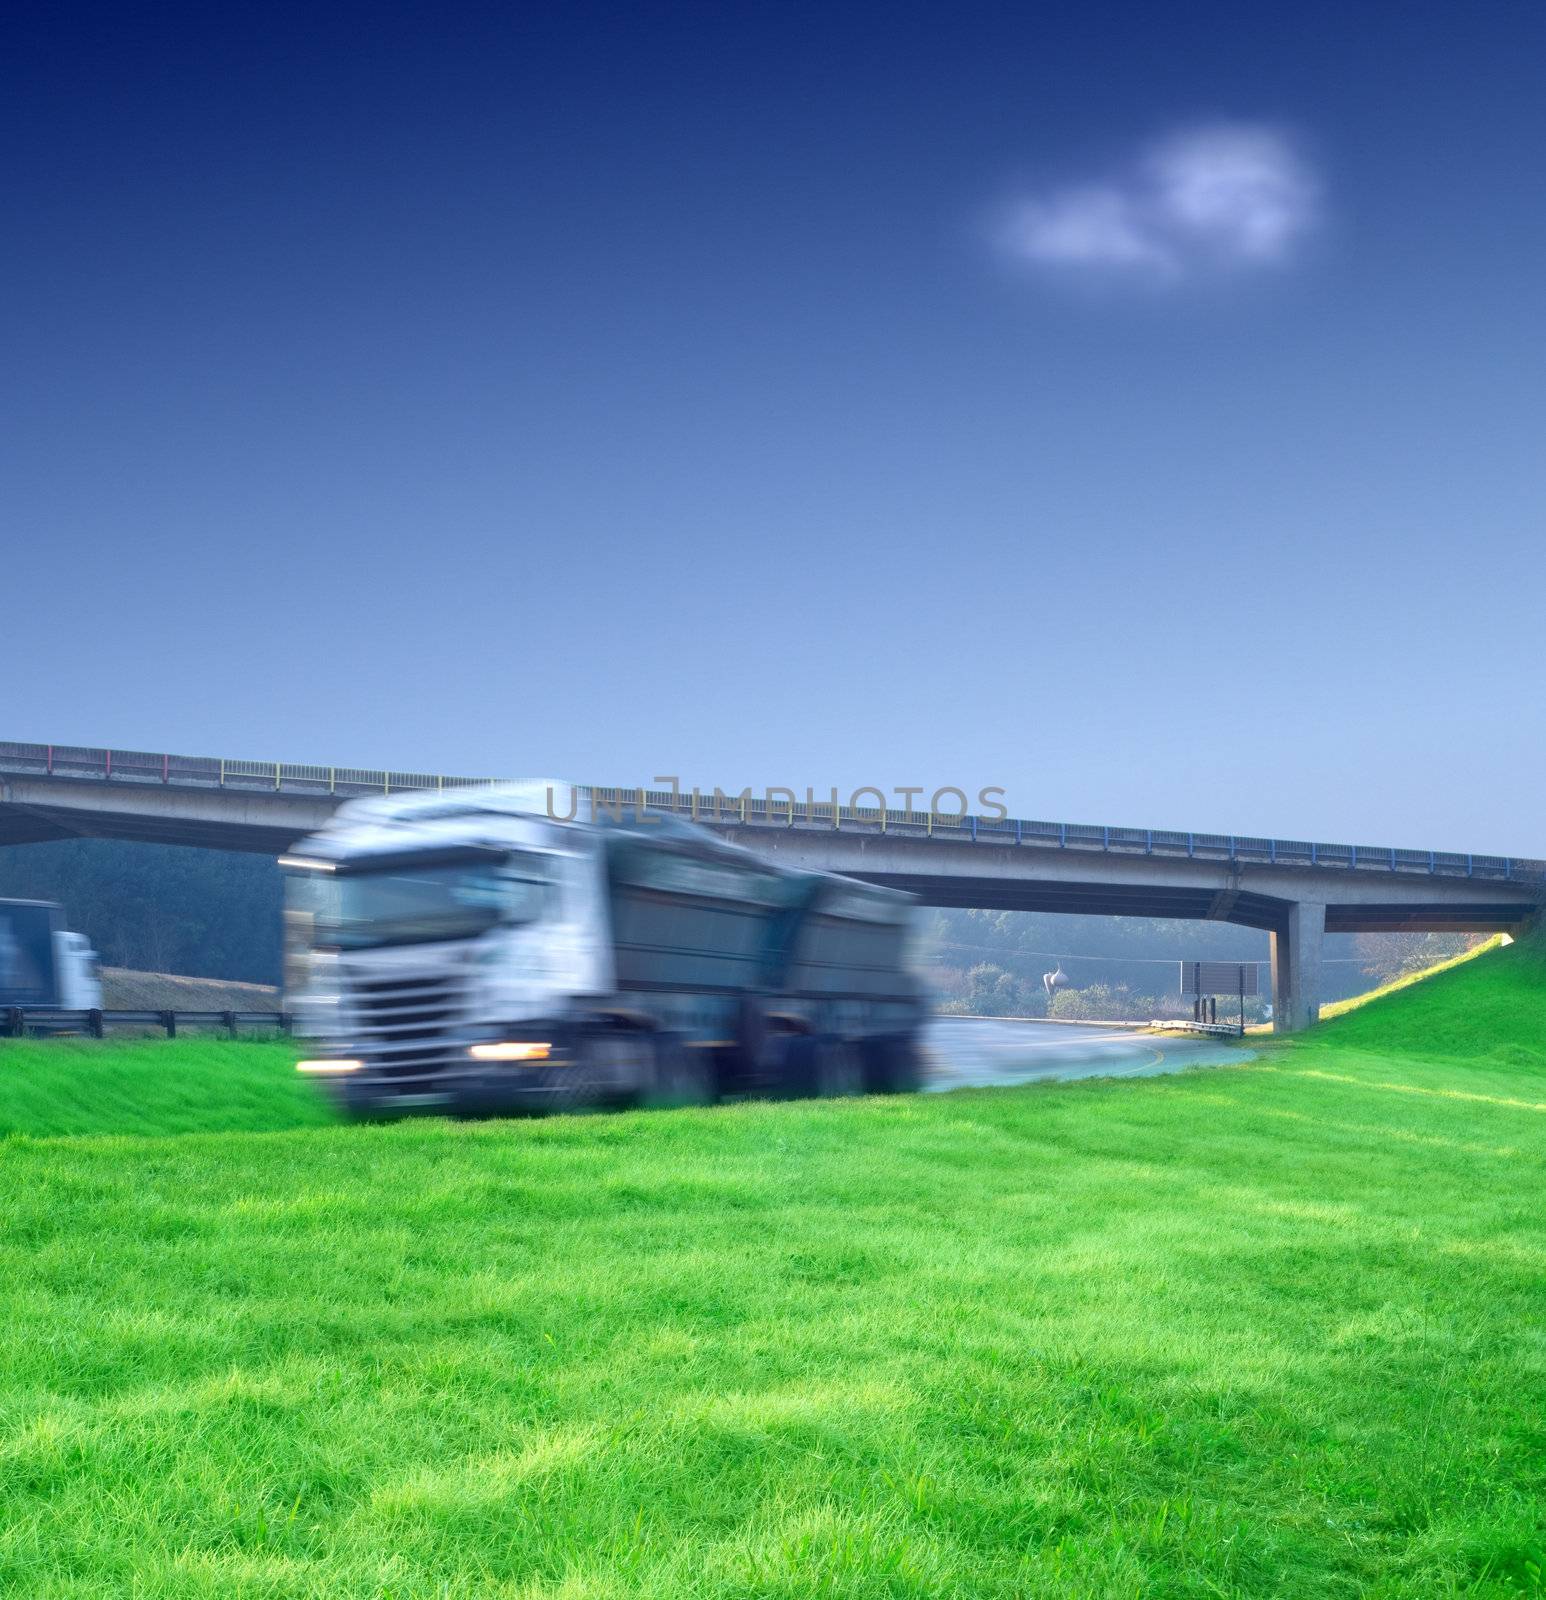 Big semi truck delivery load with green grass and blue sky and motion blur